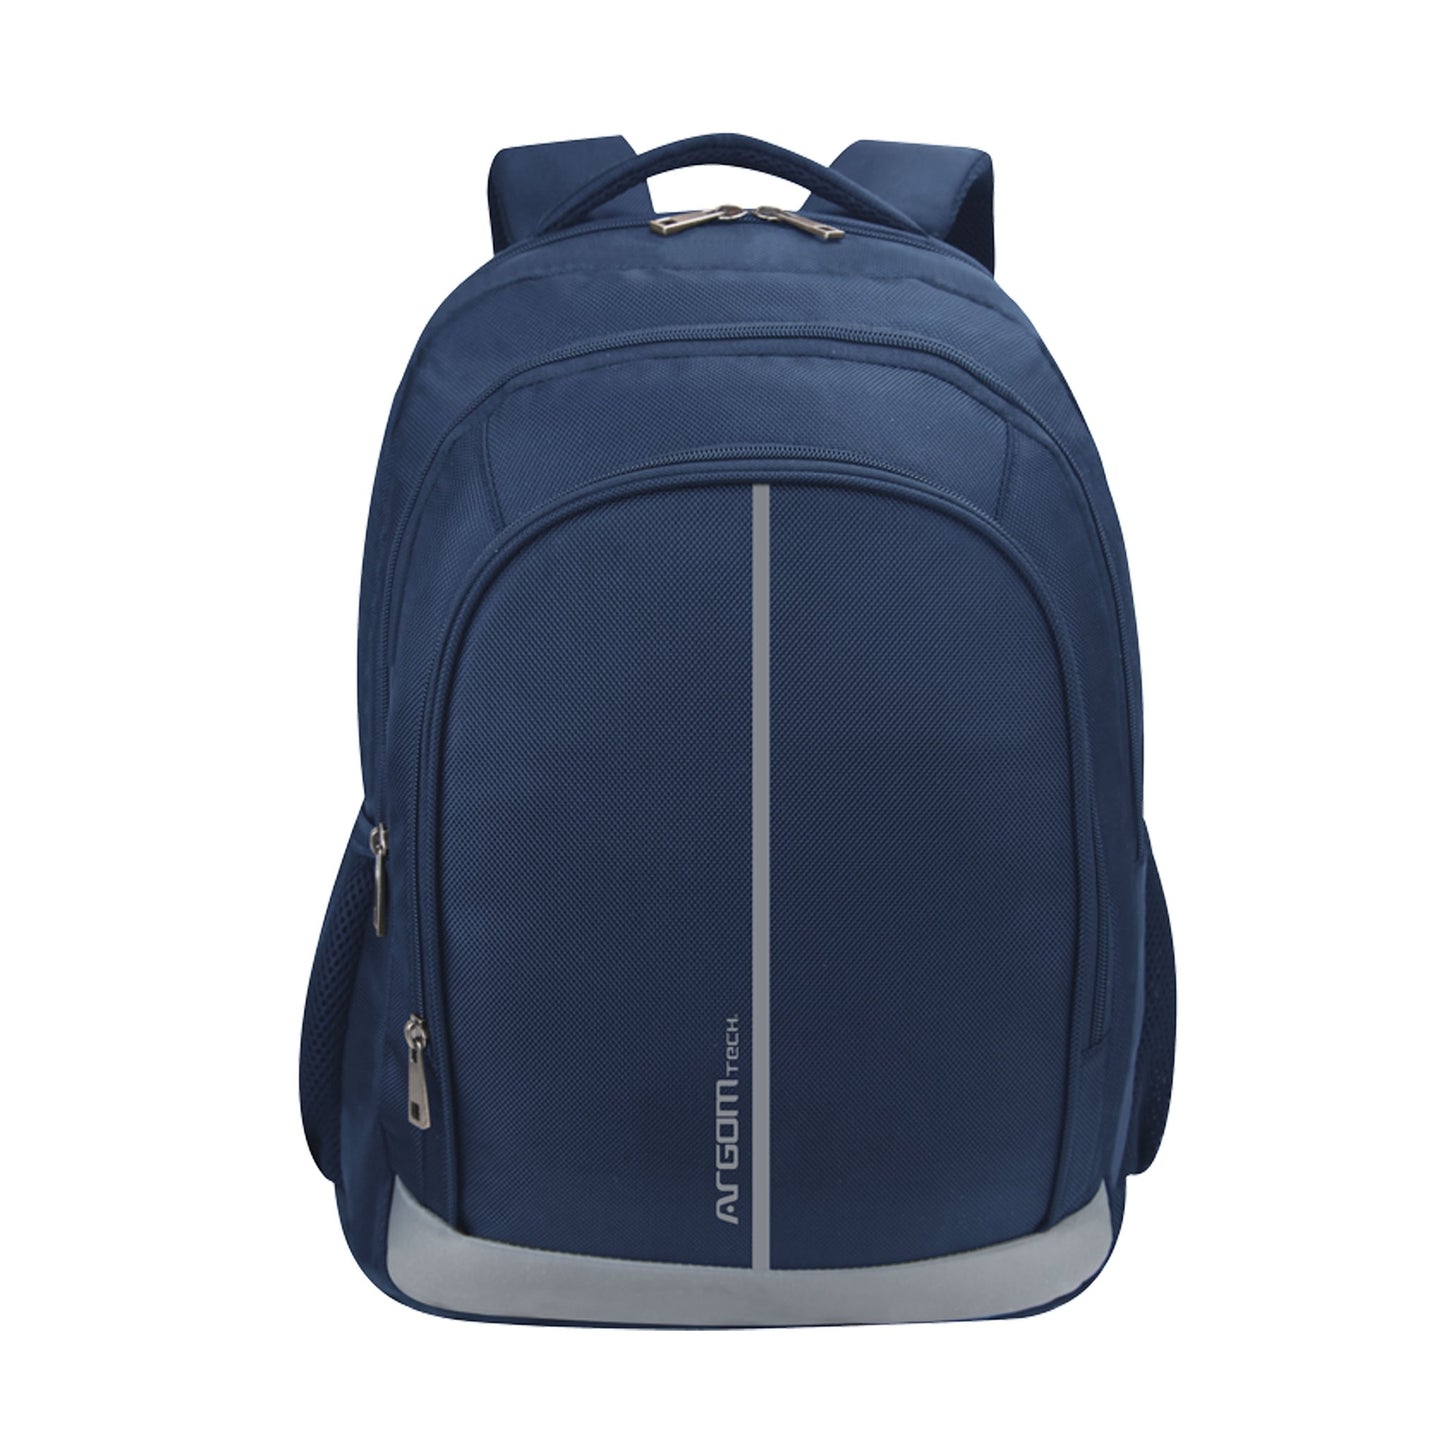 VISIONAIRE NOTEBOOK BACKPACK 15.6"